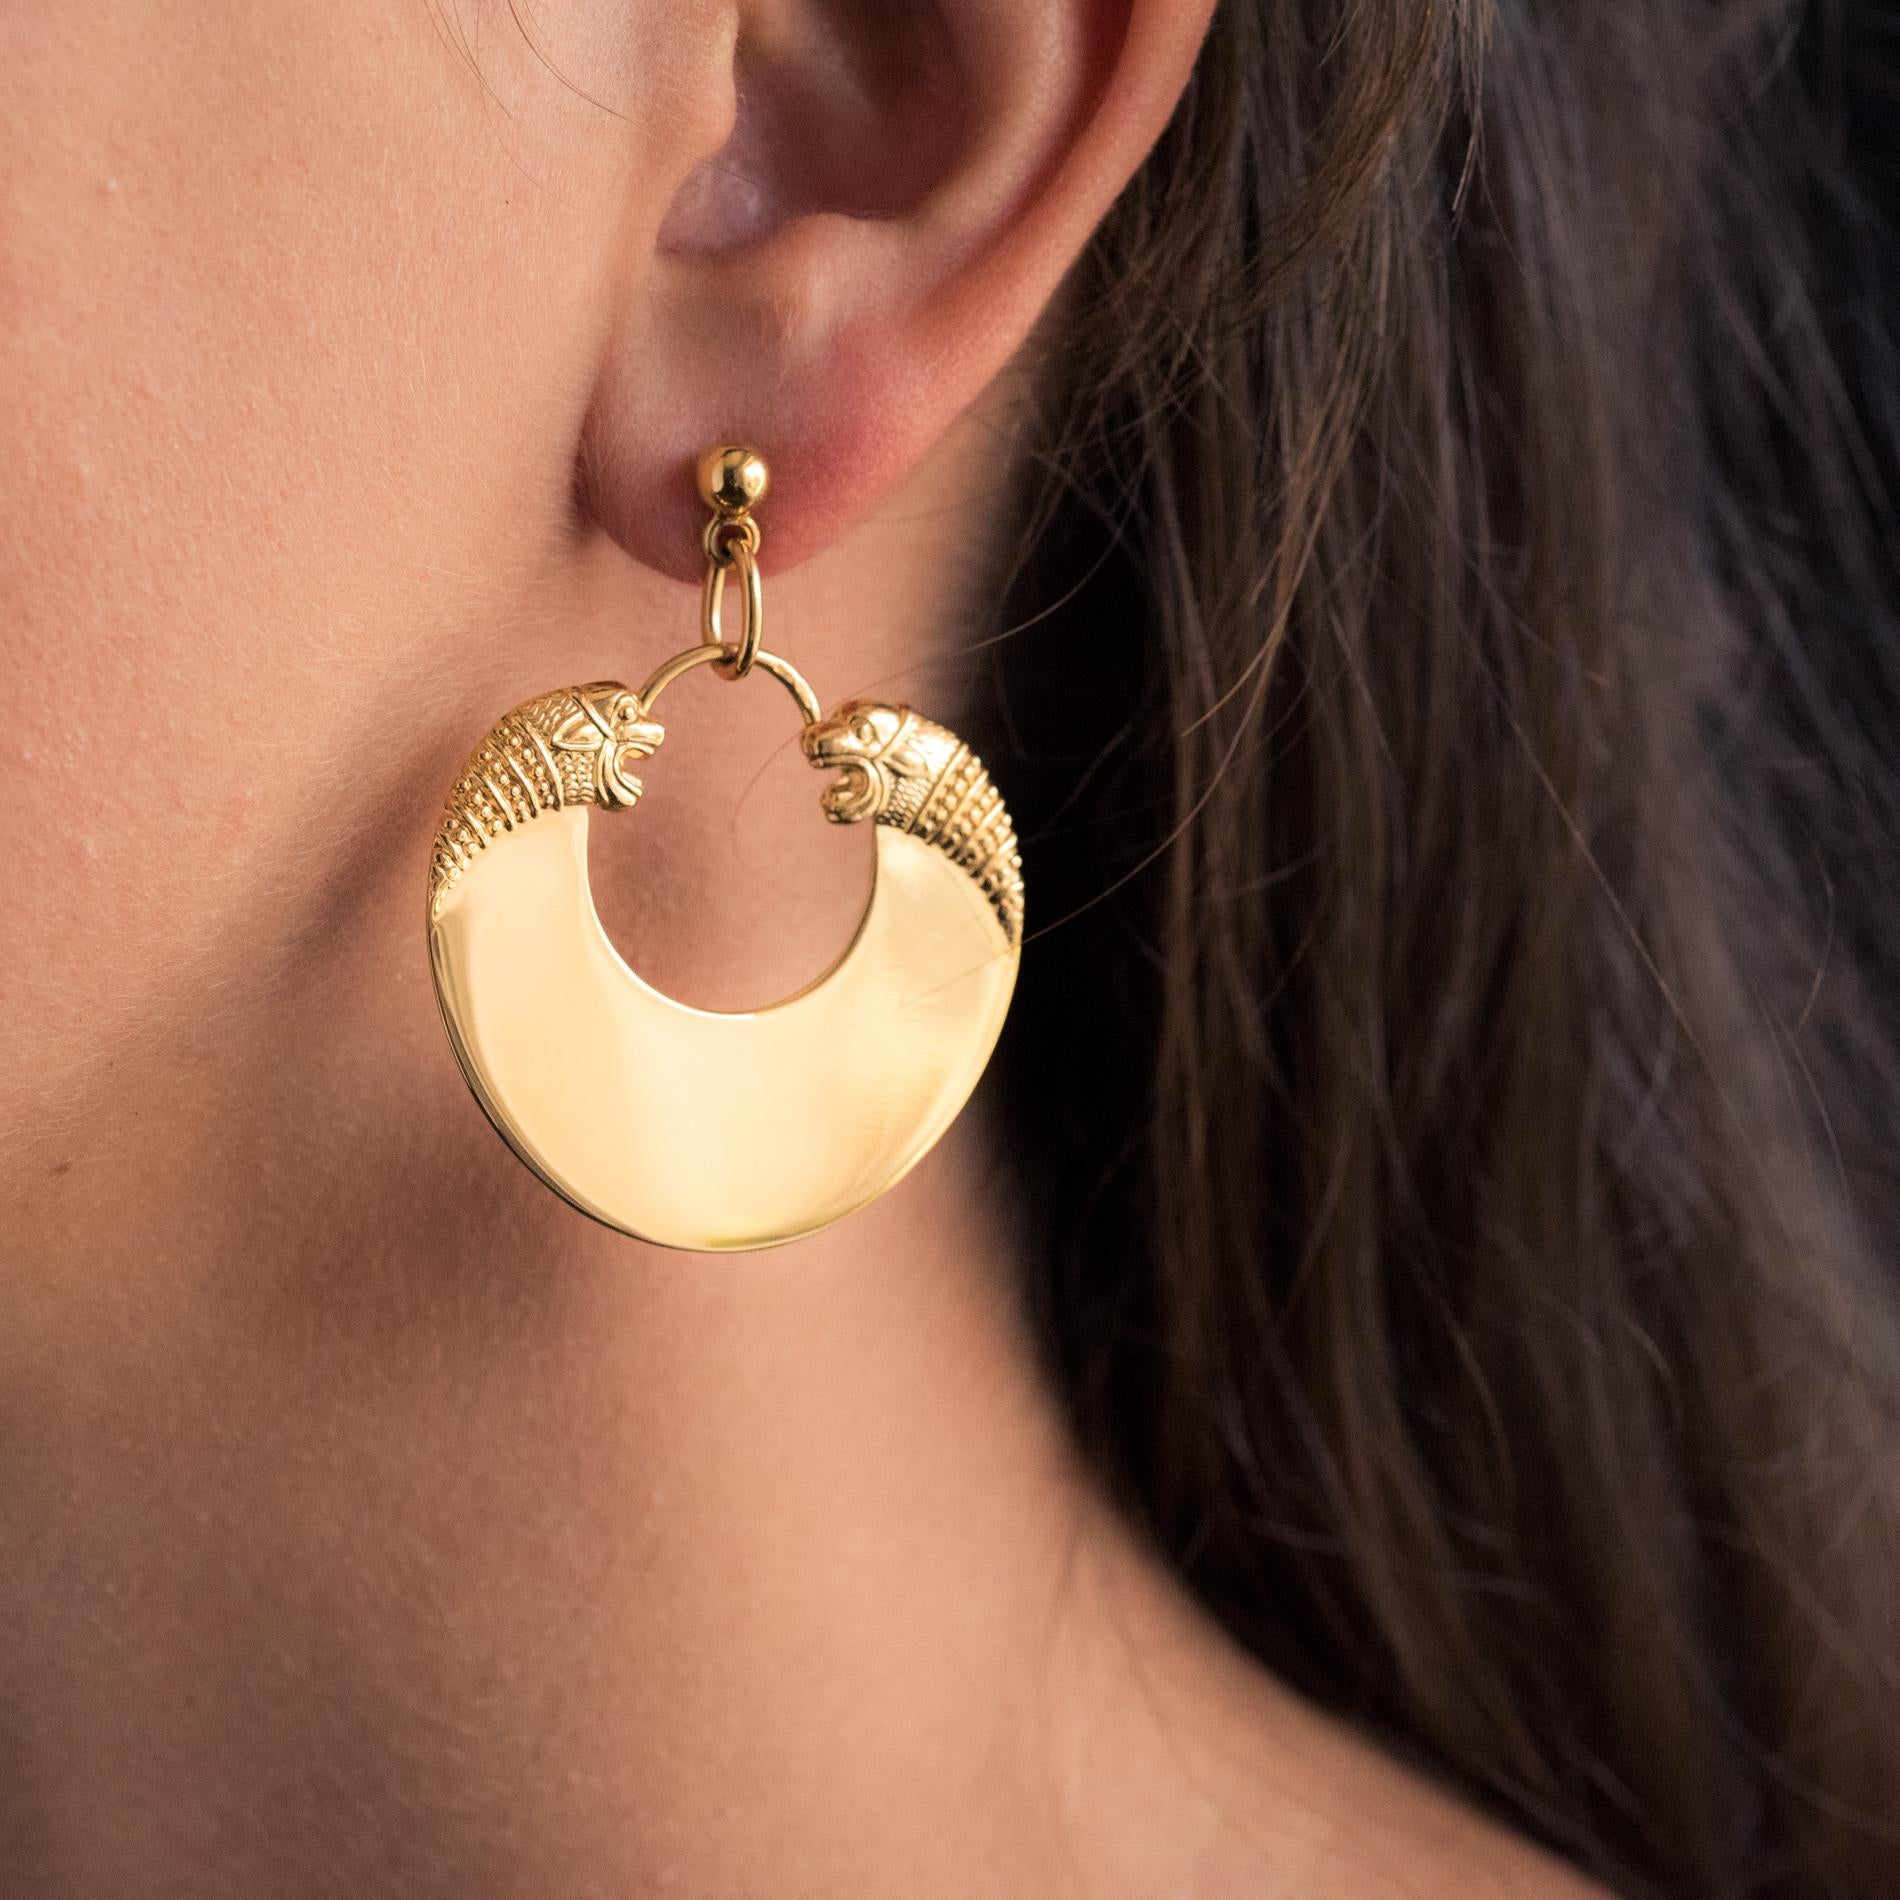 For pierced ears.
Earring in vermeil, silver and yellow gold.
Dangling earrings, they form a half moon adorned at each end with a profile of fantastic animals with a chiseled pattern. They are held by a gold pearl. The hanging system is a